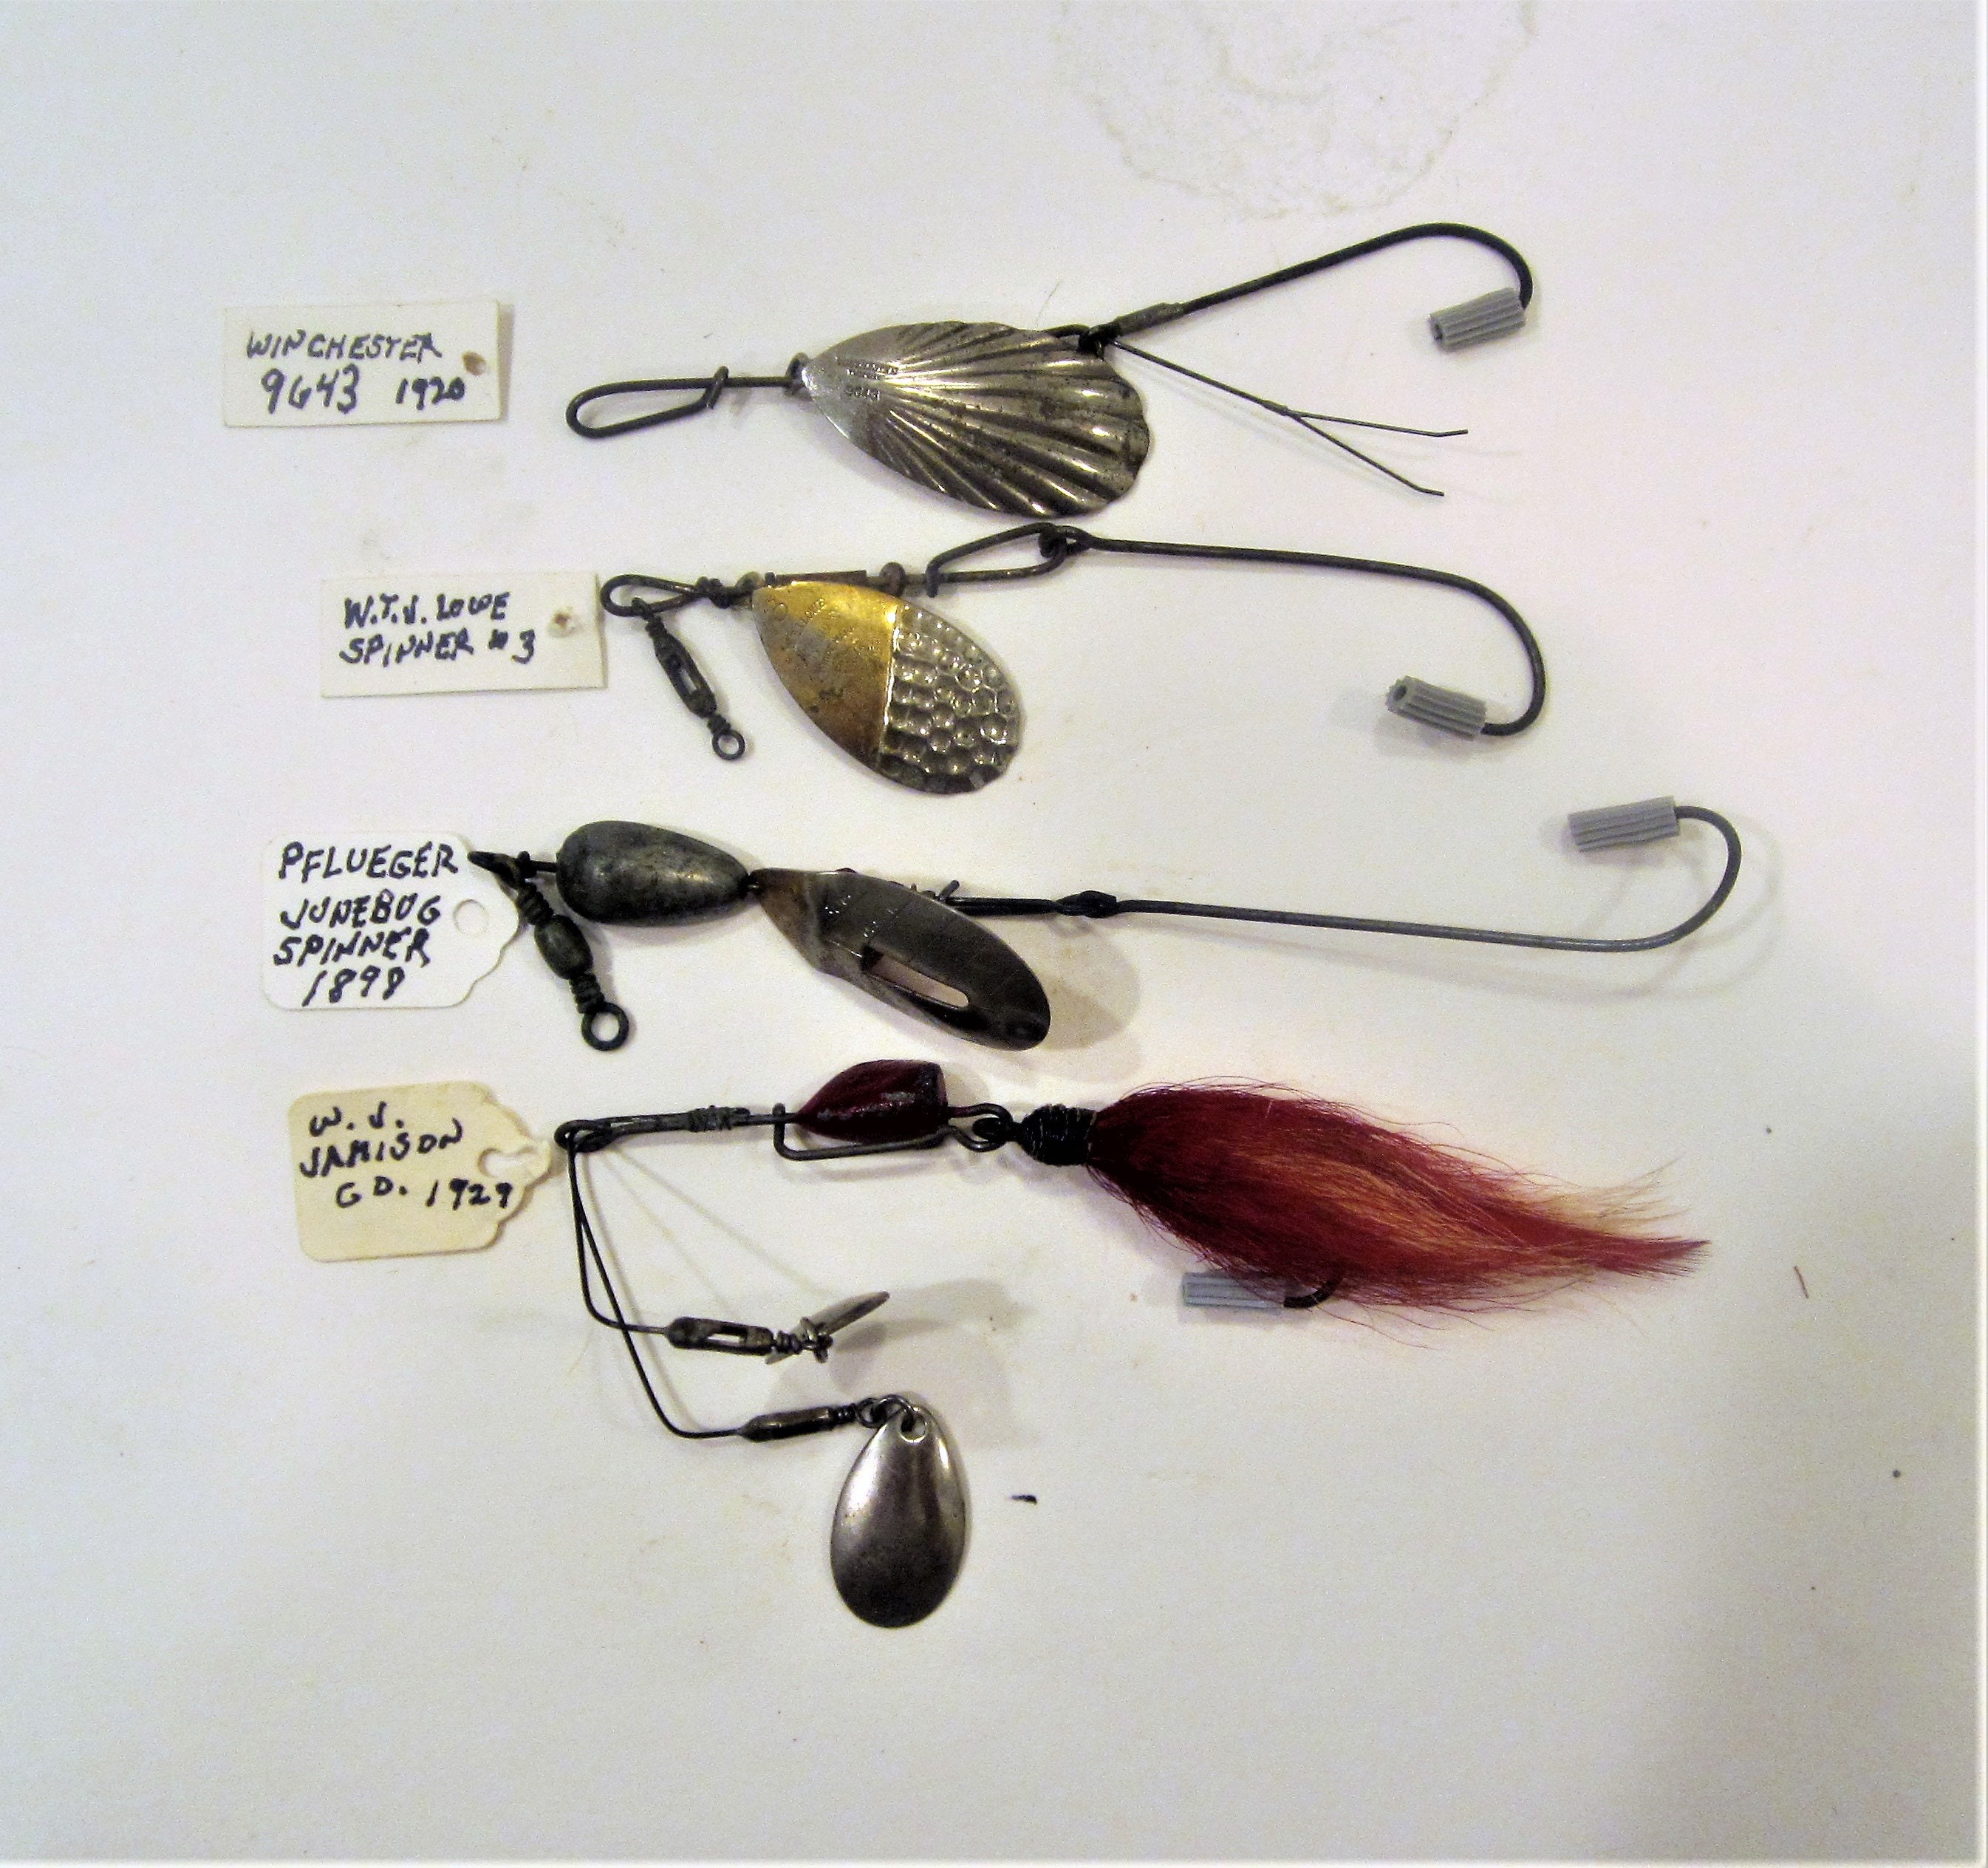 4 Antique Spinning Lures / Different Lure Co / Winchester Arms-w.t.j.loew- pflueger-w.j.jamison / All Original / Collectible / Gift Item -  Canada